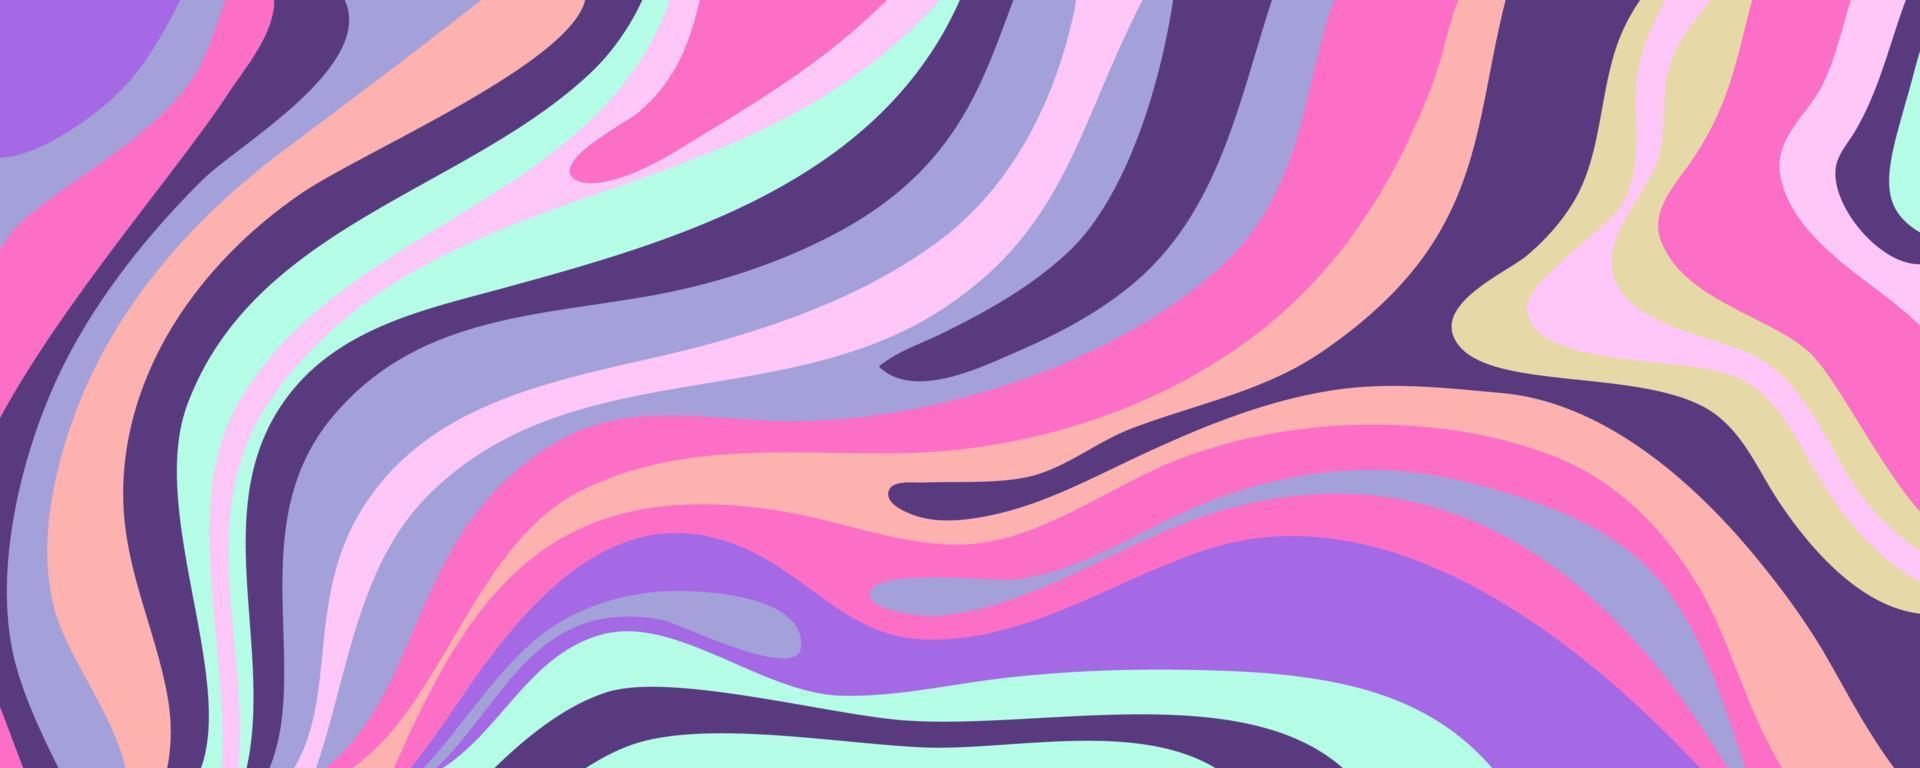 Wave y2k background for retro design. Liquid groovy marble pink background. Purple y2k pattern in modern style pink. Psychedelic retro wave wallpaper